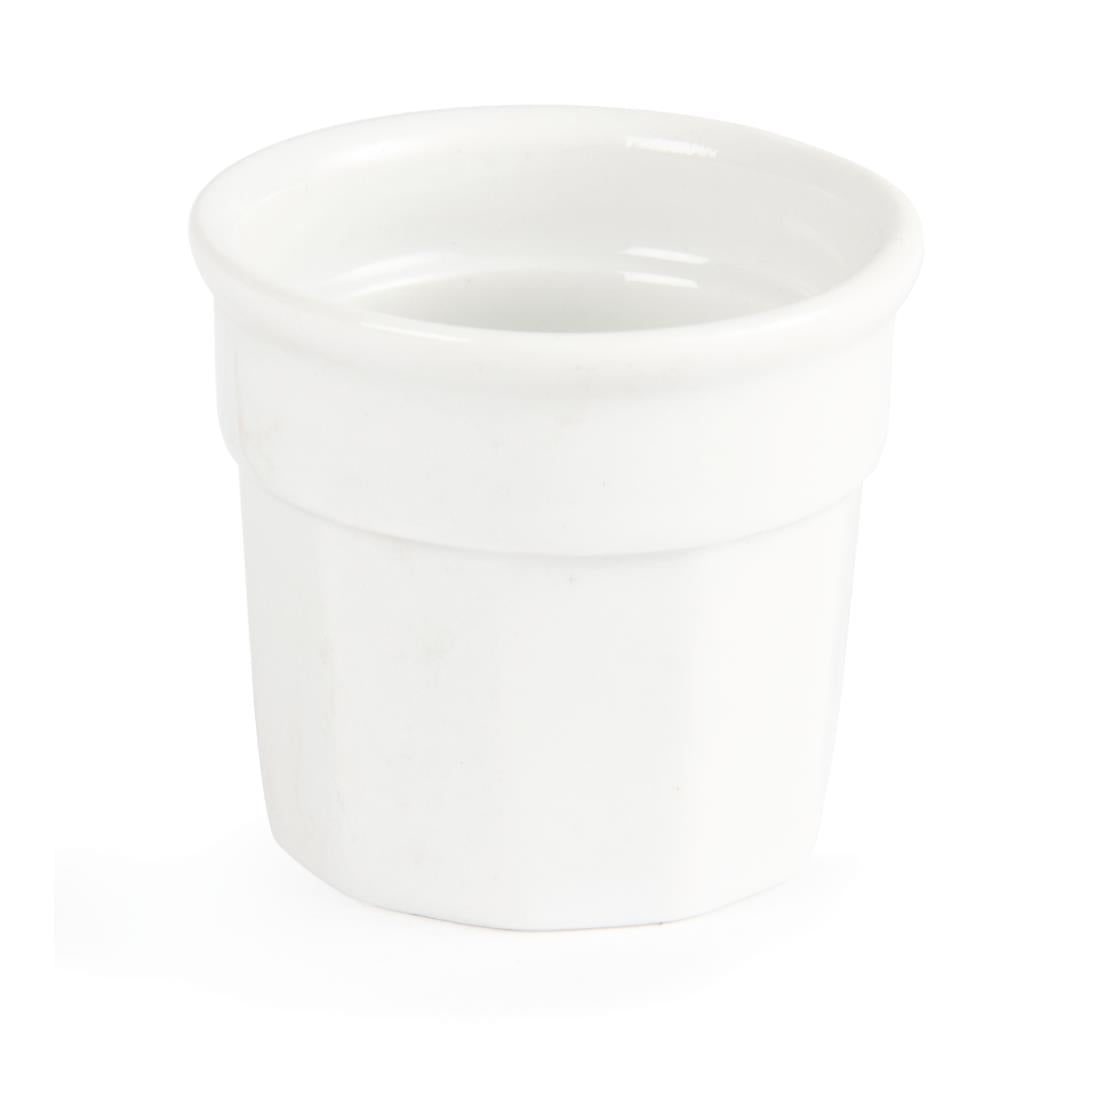 CD728 Olympia Dipping Pots 50mm (Pack of 12)